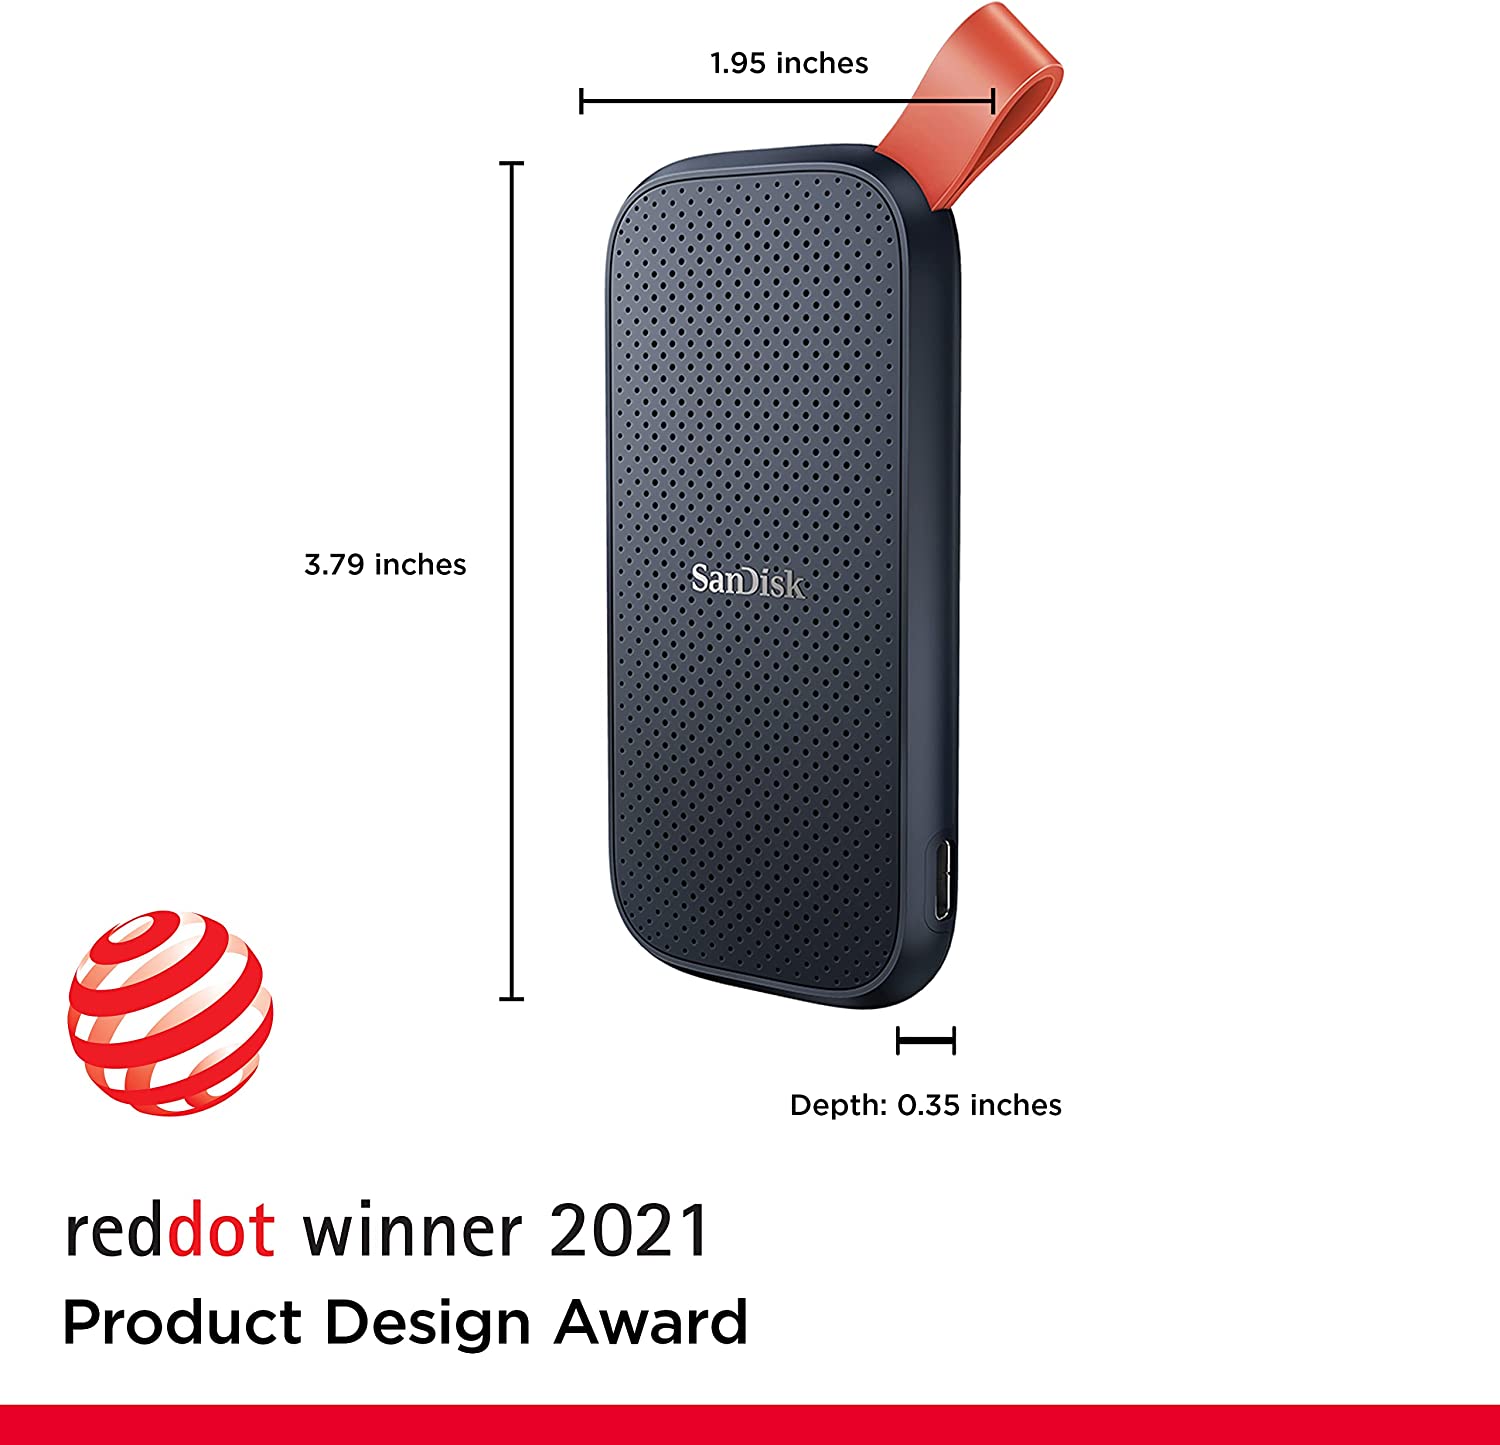 Amazon Sale SSD: Backup Your Genealogy Research and Save on SanDisk 2TB Portable SSD!